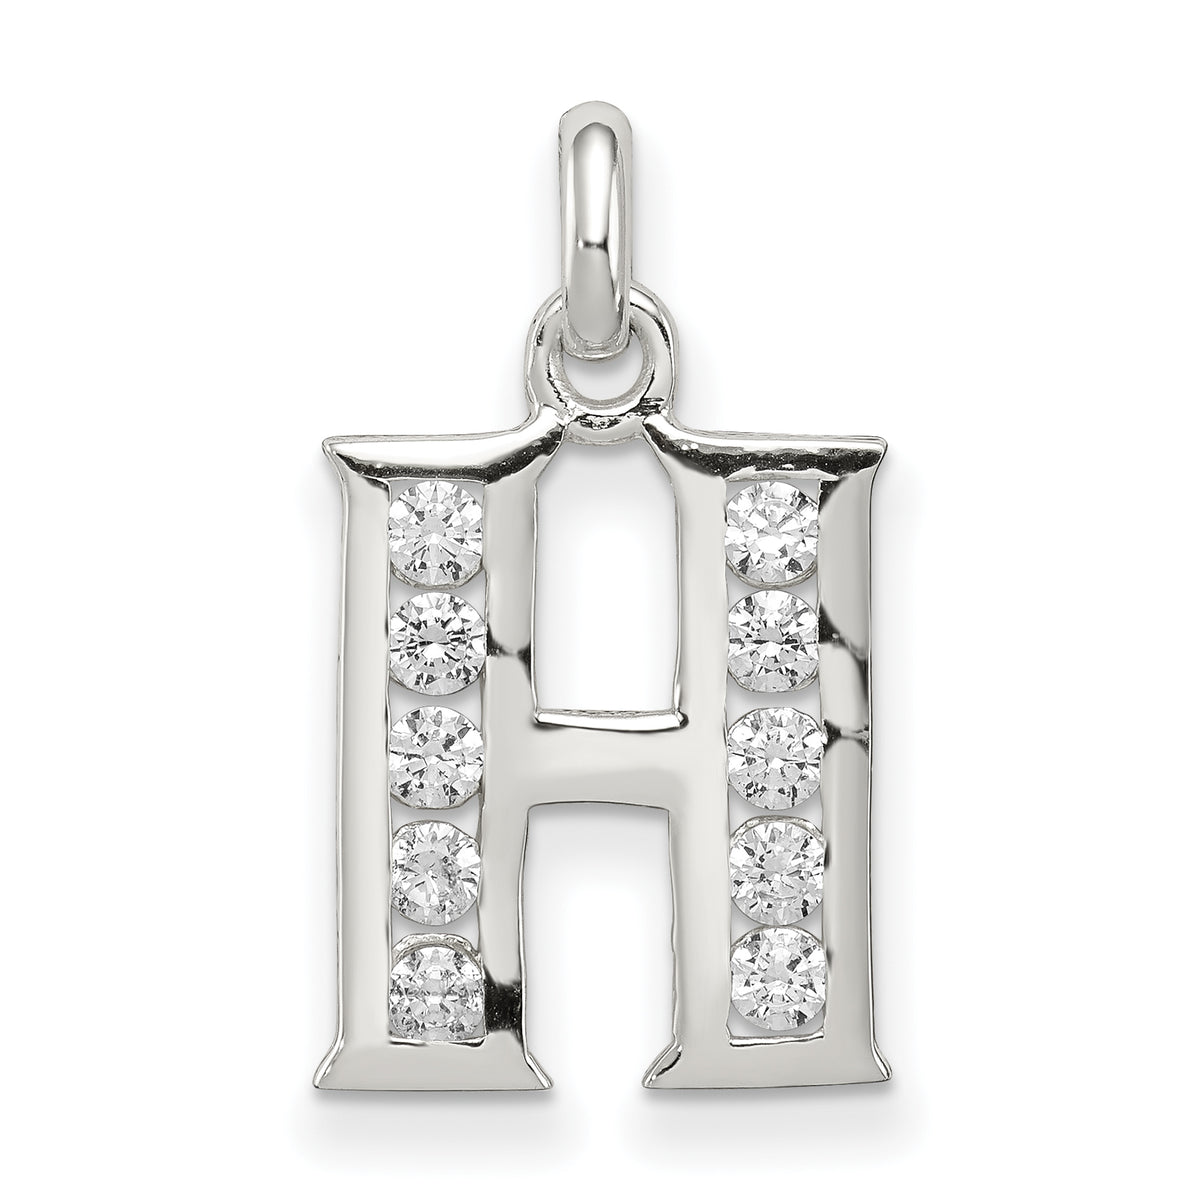 Sterling Silver White CZ Letter H Initial Pendant